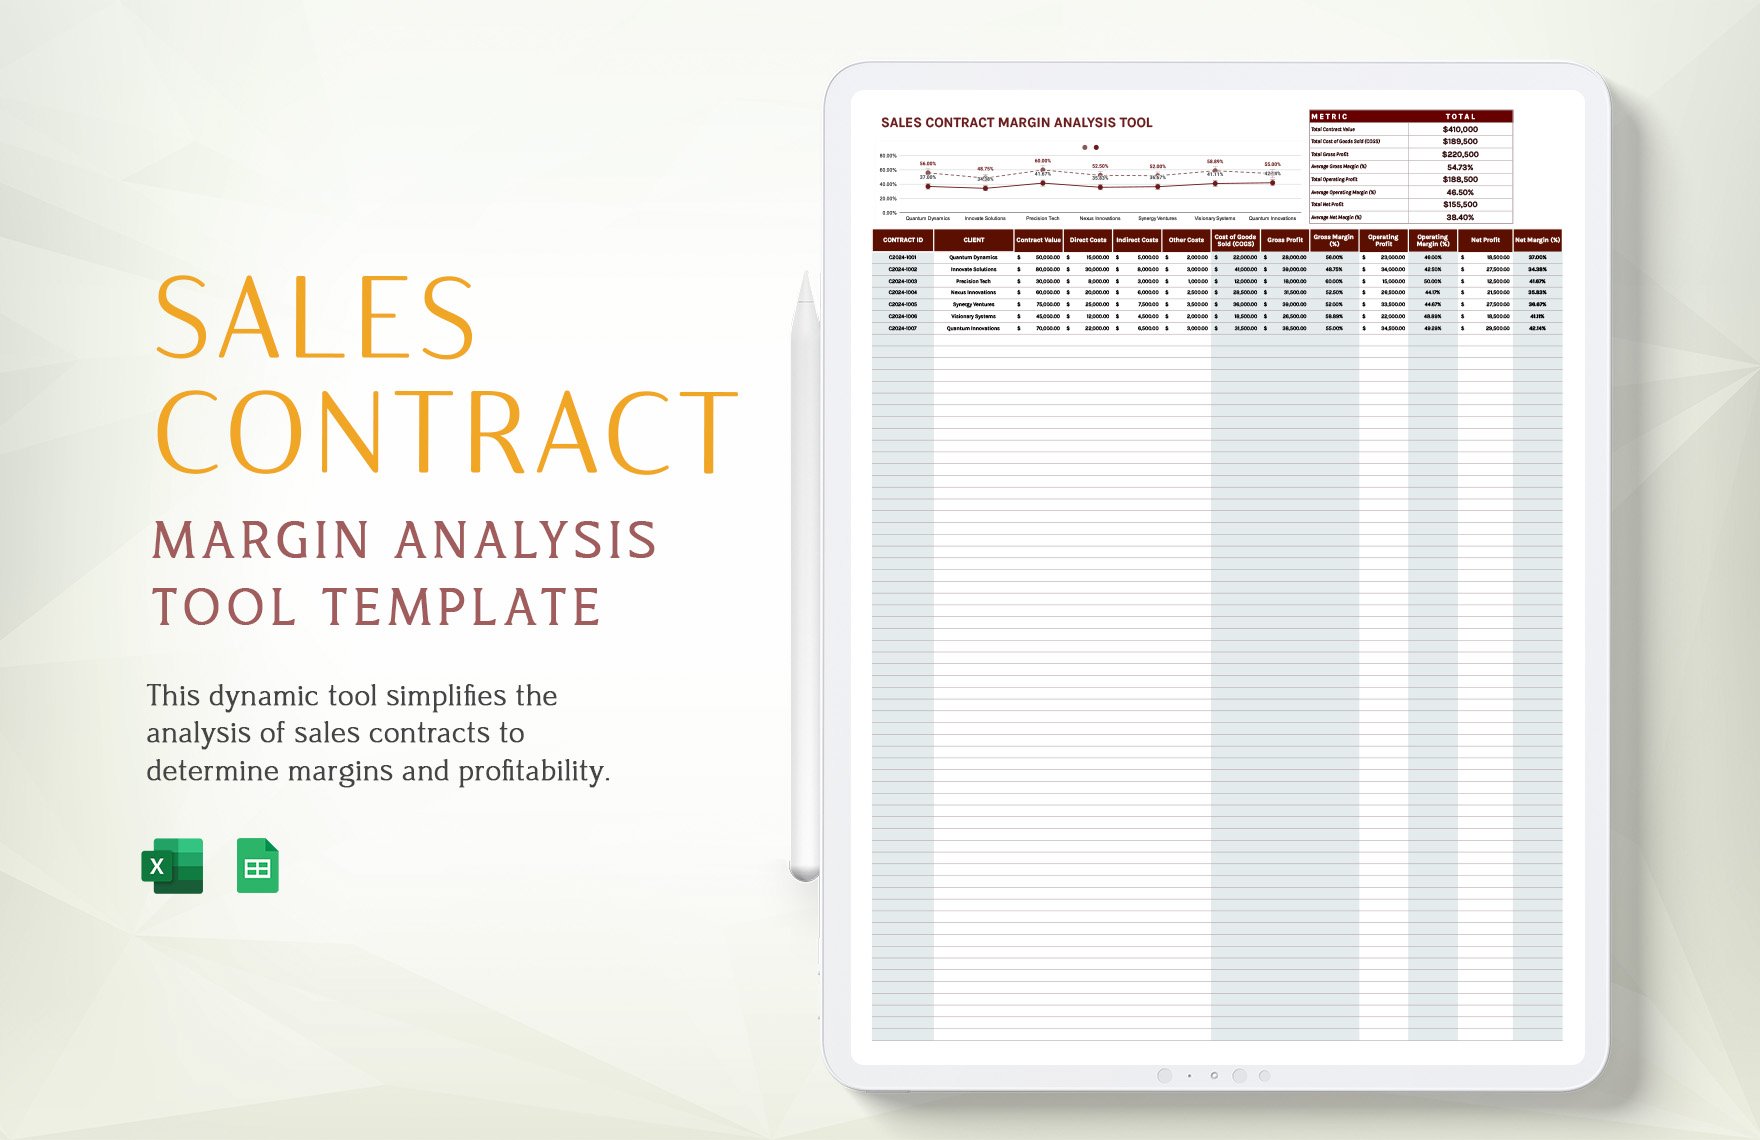 Sales Contract Margin Analysis Tool Template